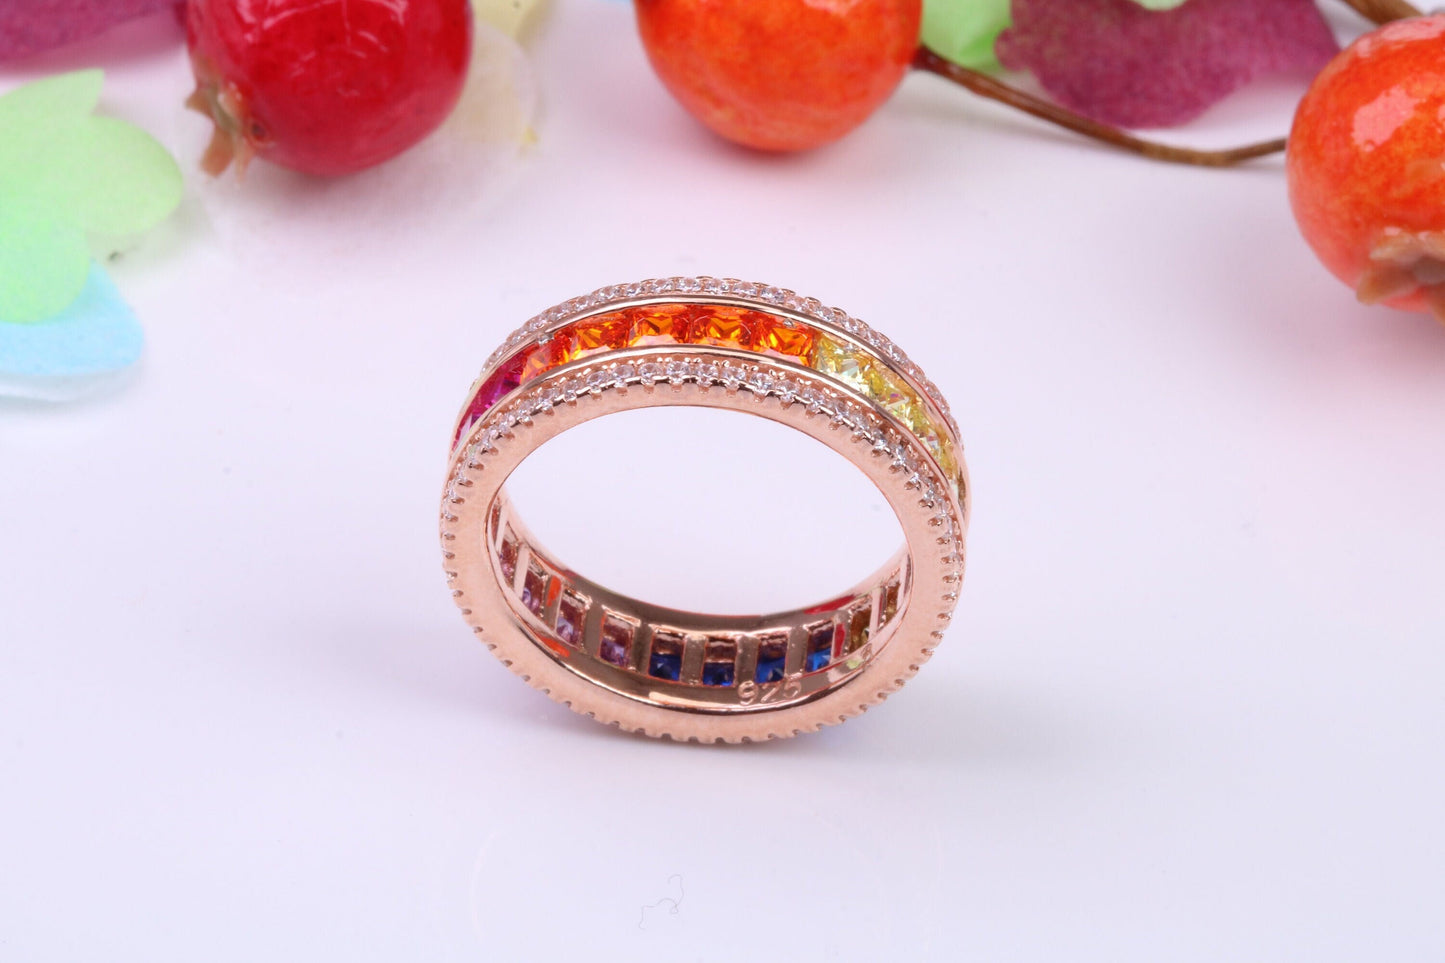 Very Dressy 7 mm wide Rainbow Cubic Zirconia set Ring, Made from solid Silver, 18ct Rose Gold Plated